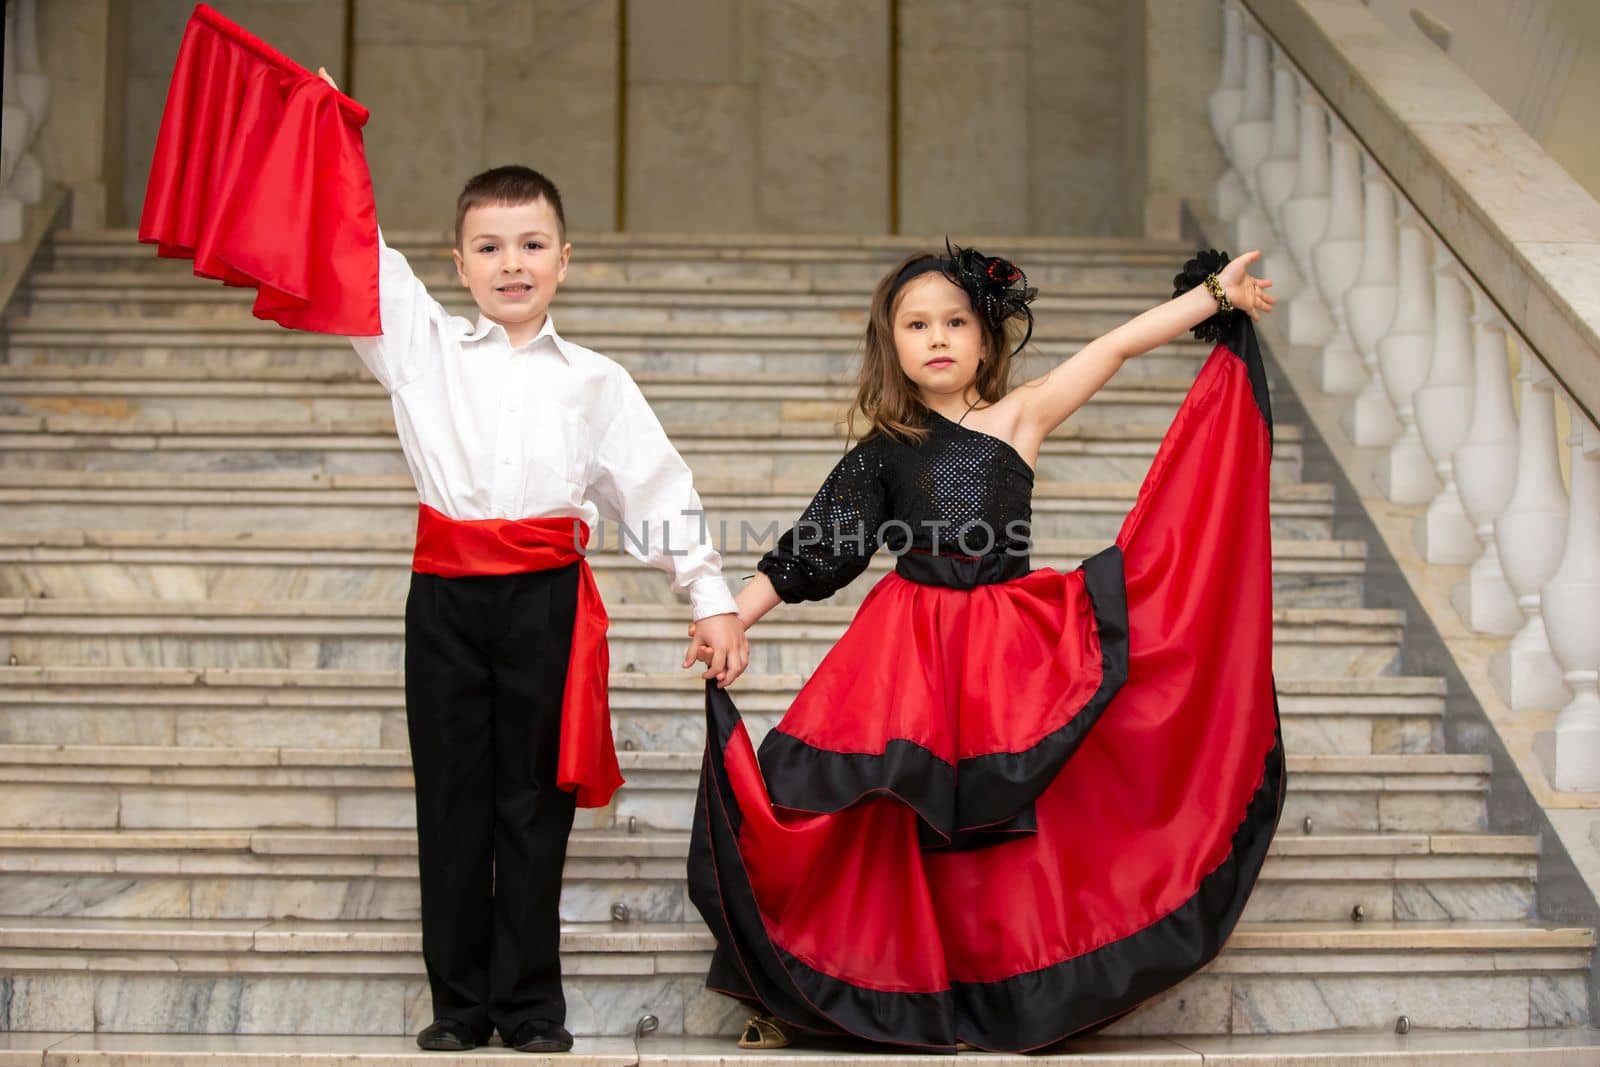 Belarus, city of Gomel, May 21, 2021 Children's holiday in the city. Boy and girl in national Spanish clothes.